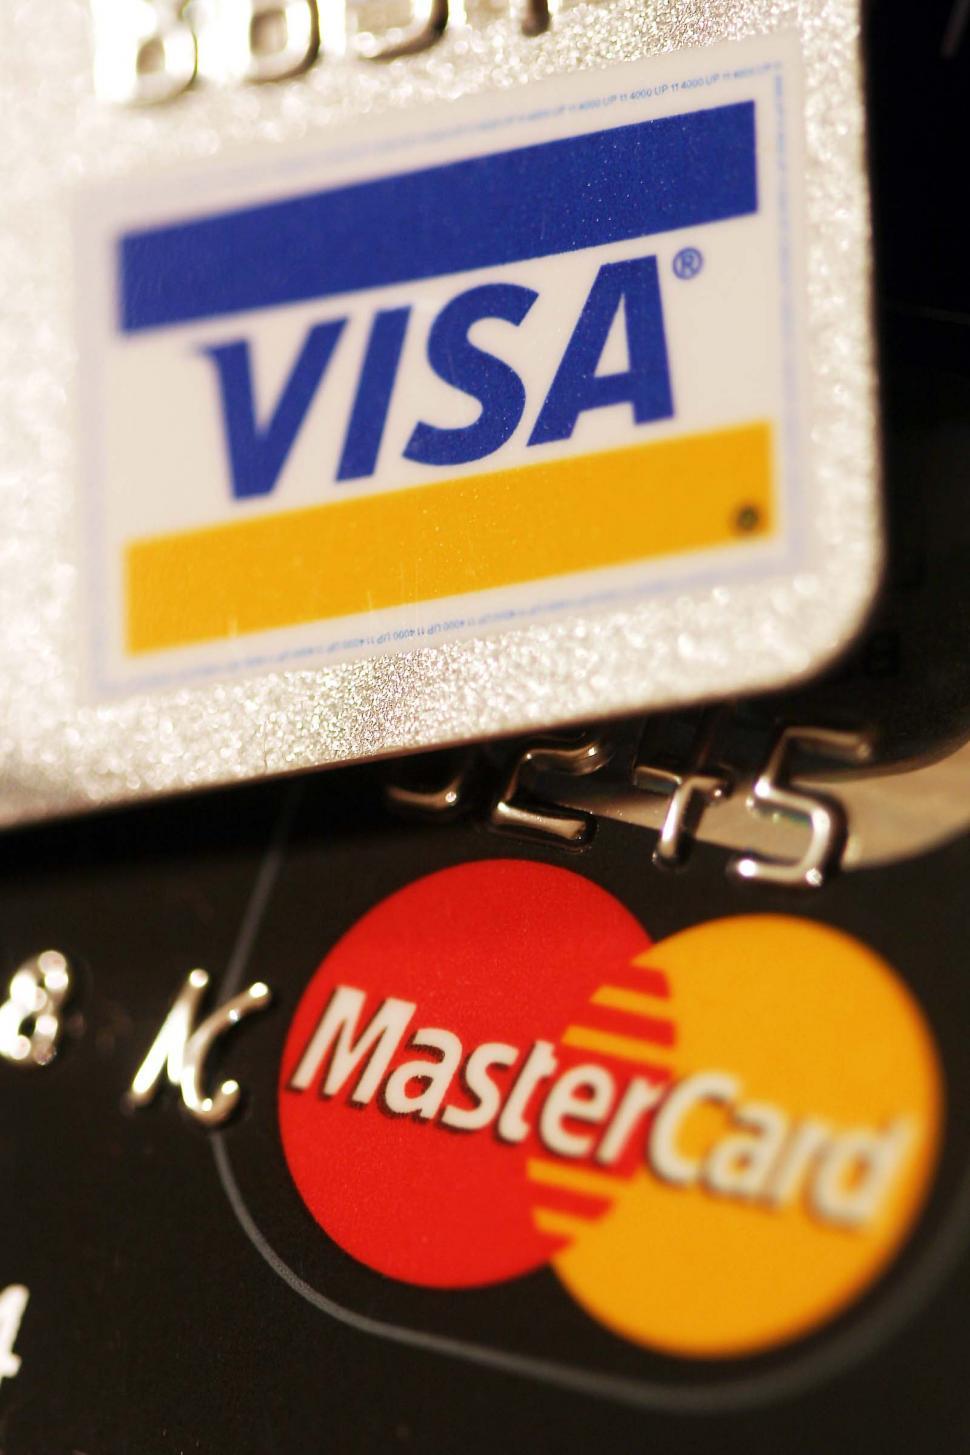 Free Image of credit cards visa mastercard logos numbers loan commerce spend shopping buy purchase plastic debit debt 